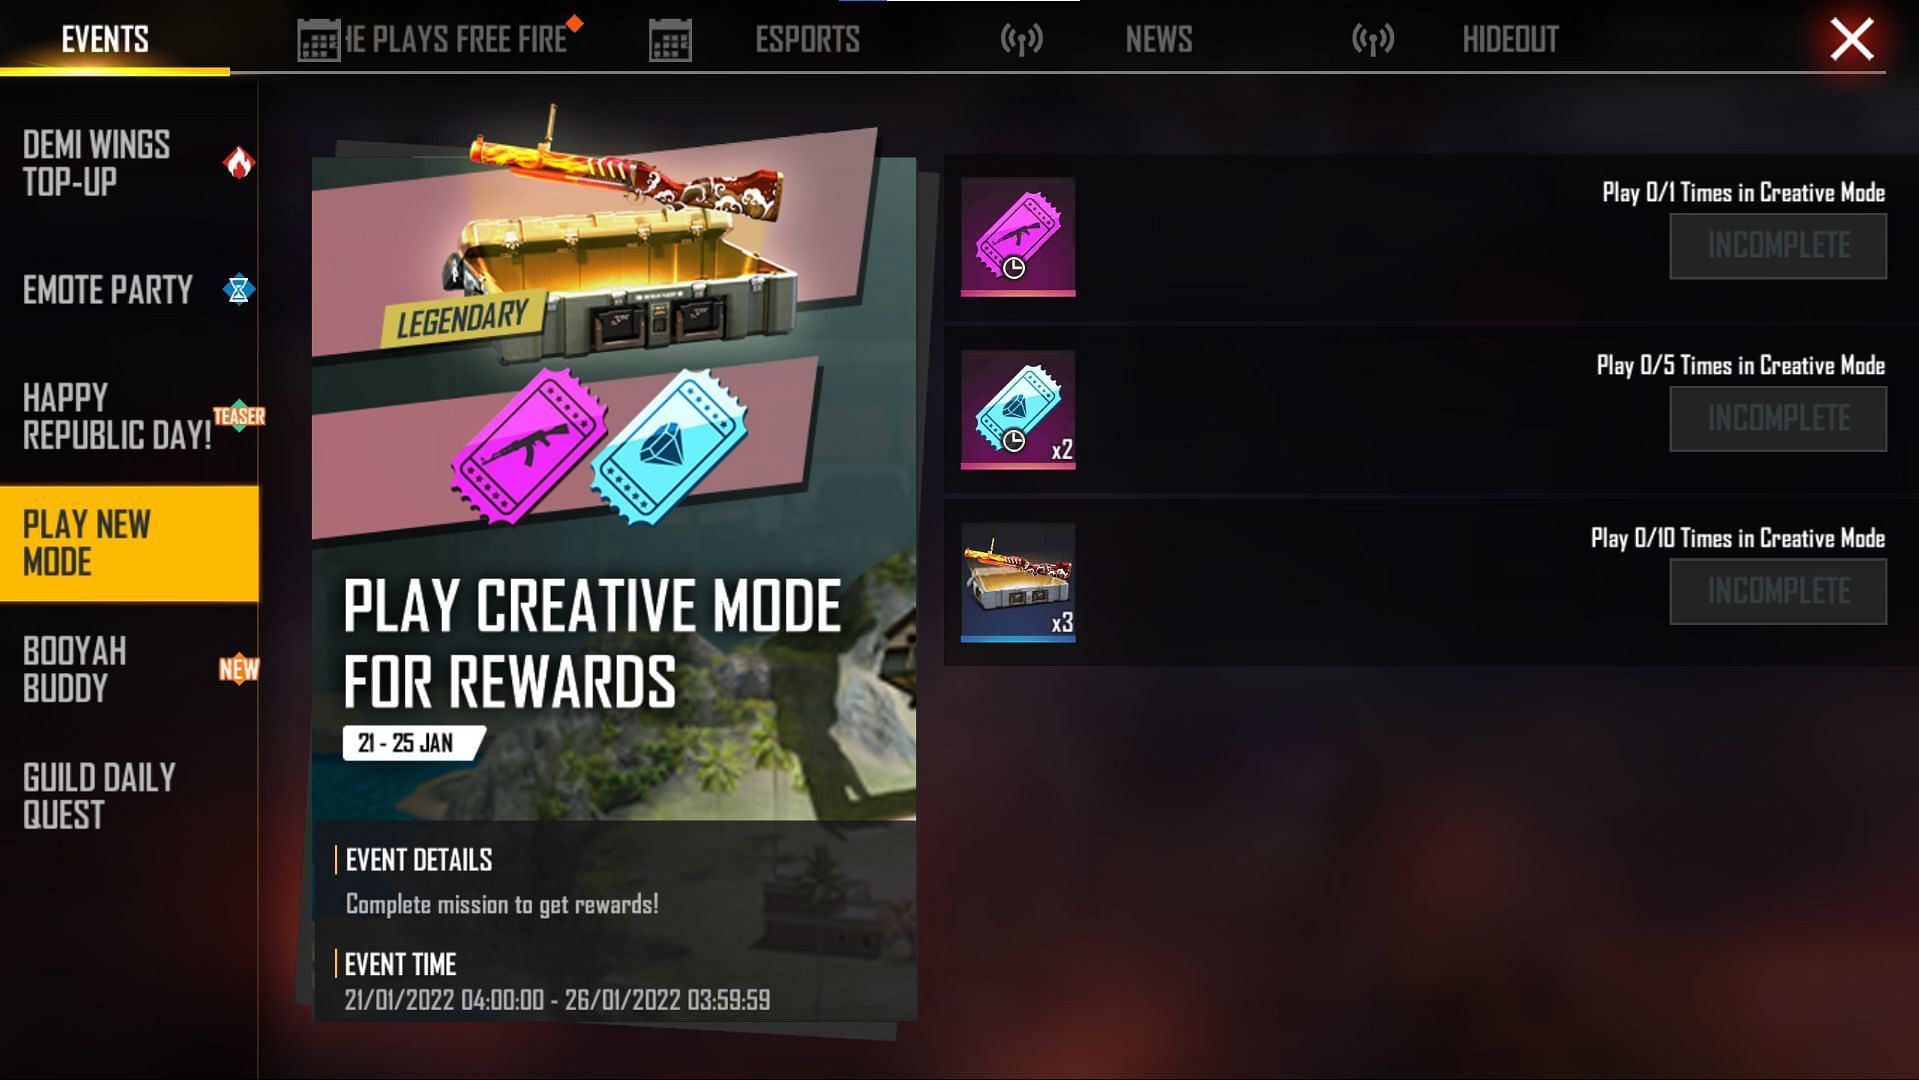 Users must participate in Creative Mode matches (Image via Garena)